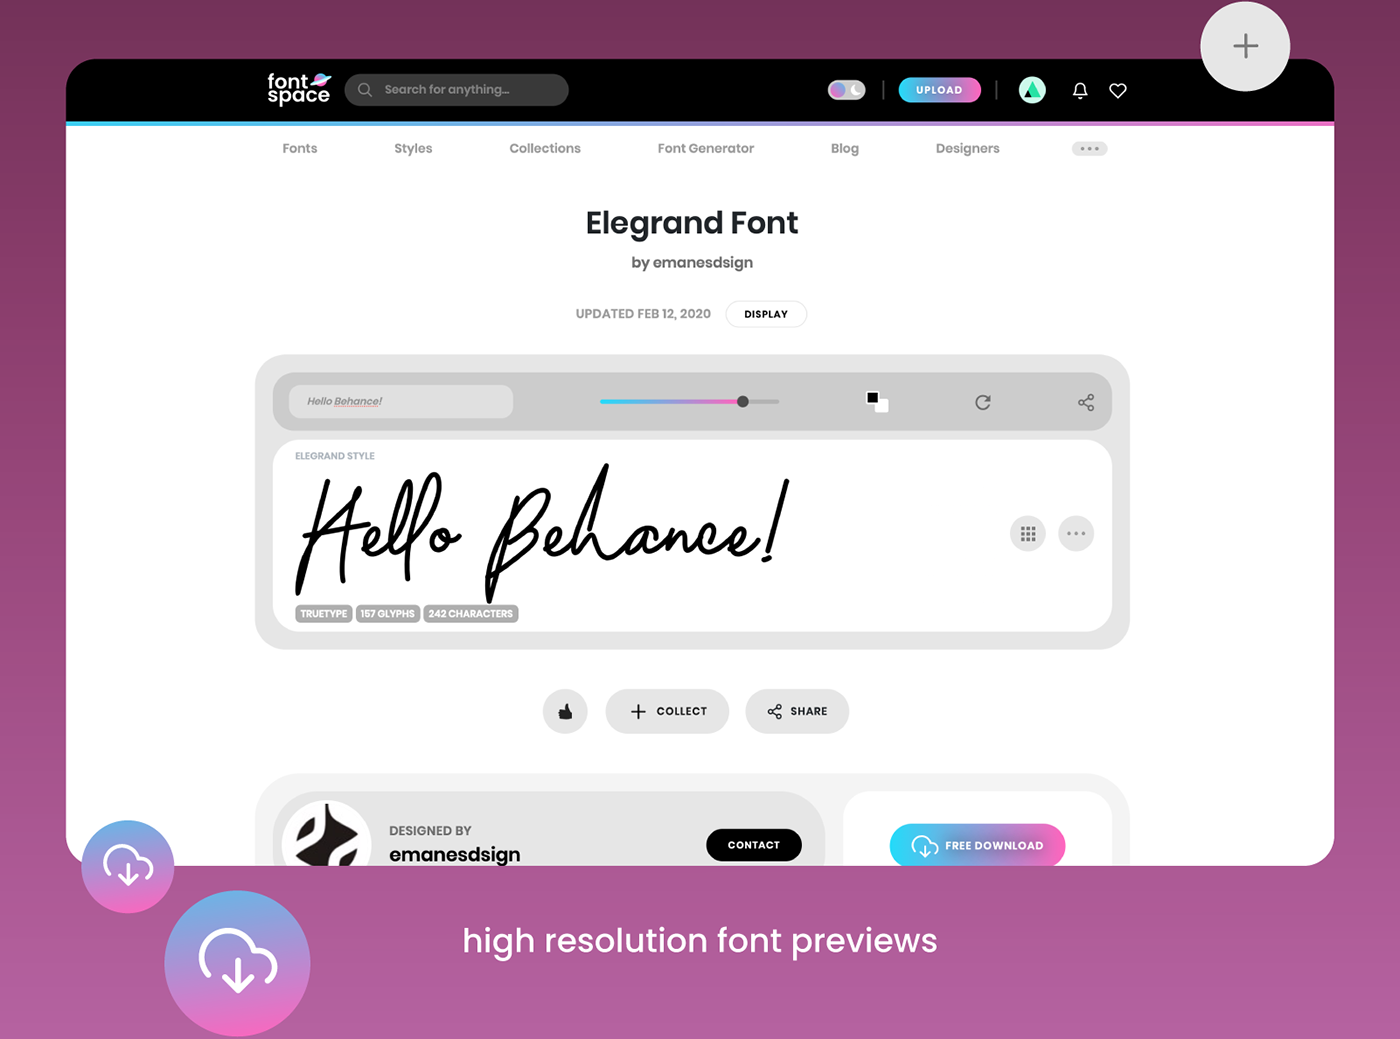 fonts fontspace free rebranding redesign browse collections dark mode branding  ui design